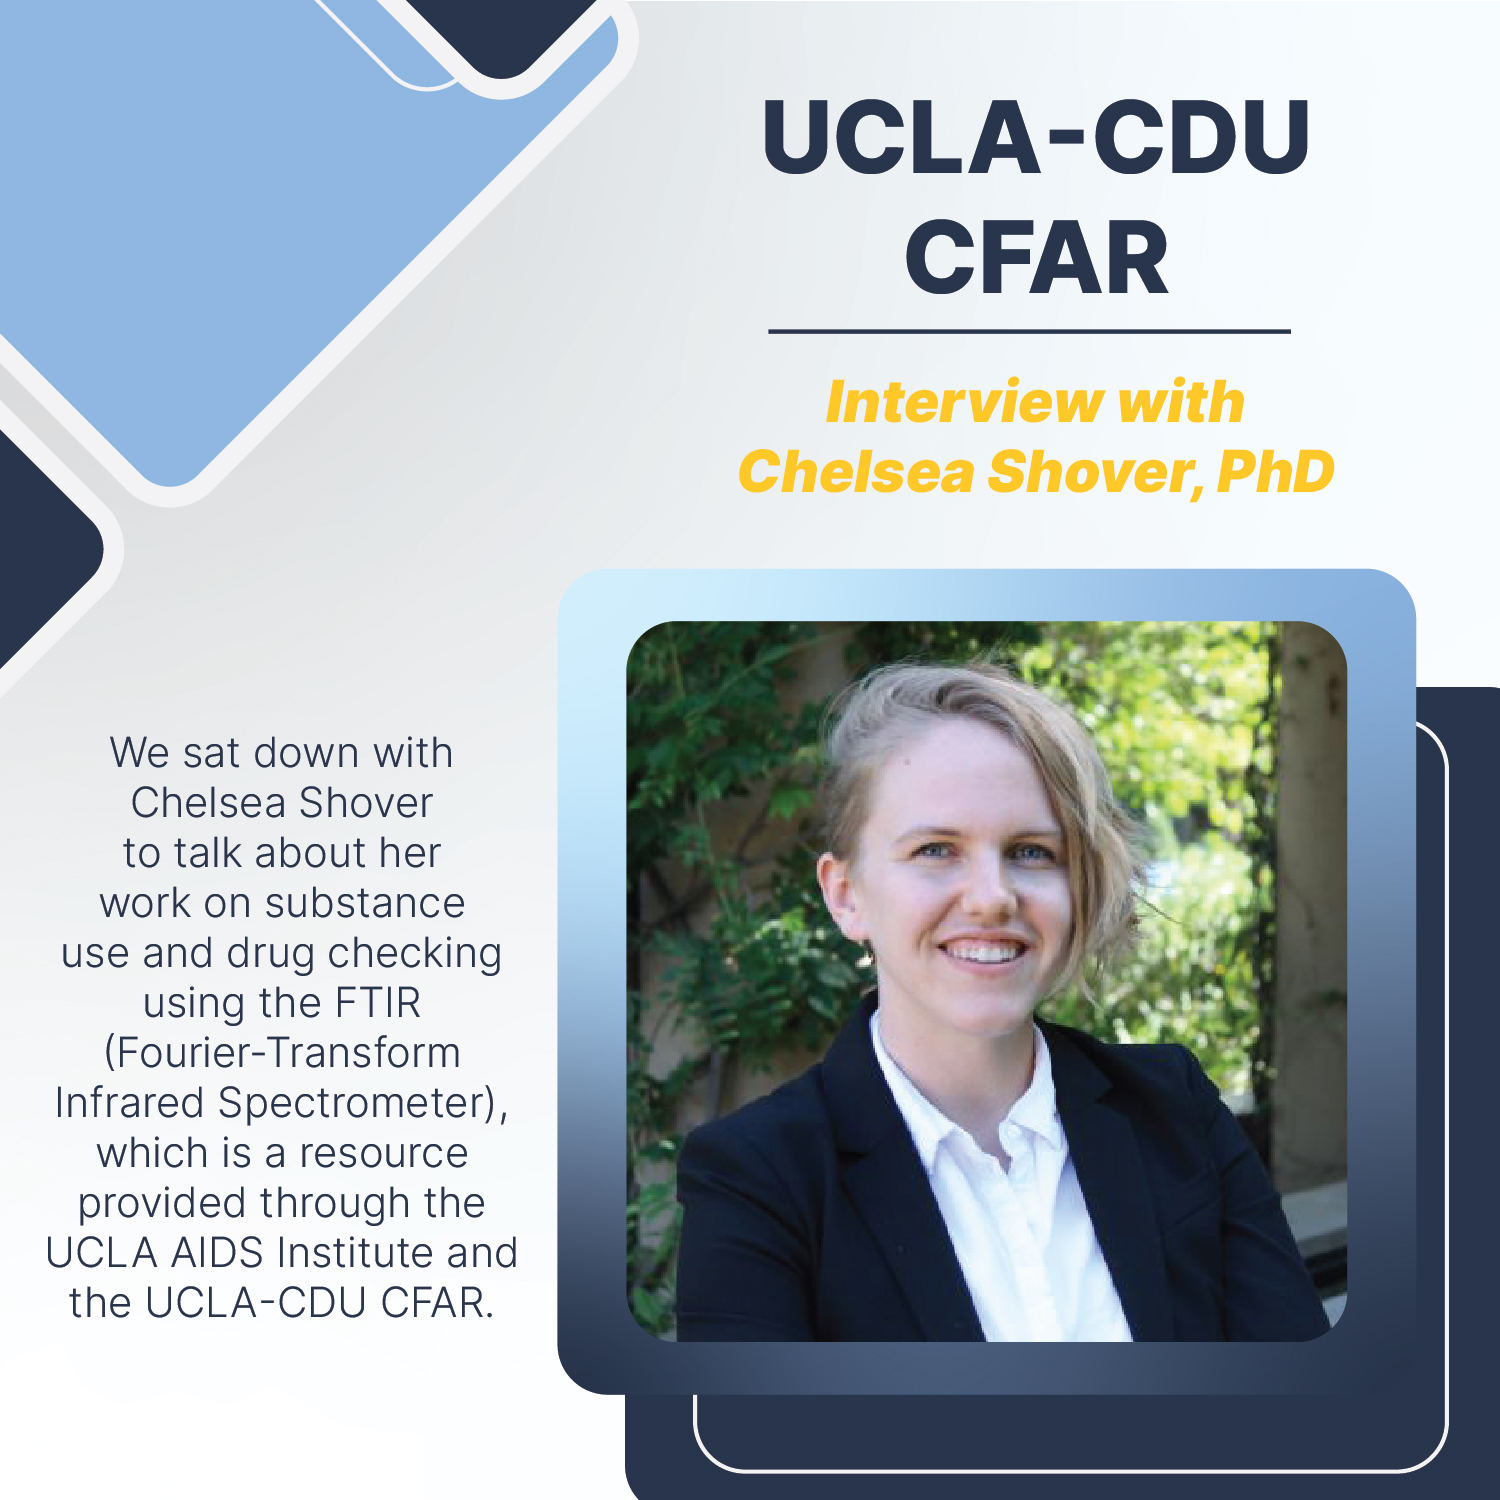 Interview with Chelsea Shover on Substance Use and Drug Checking Using a UCLA-CDU CFAR Resource